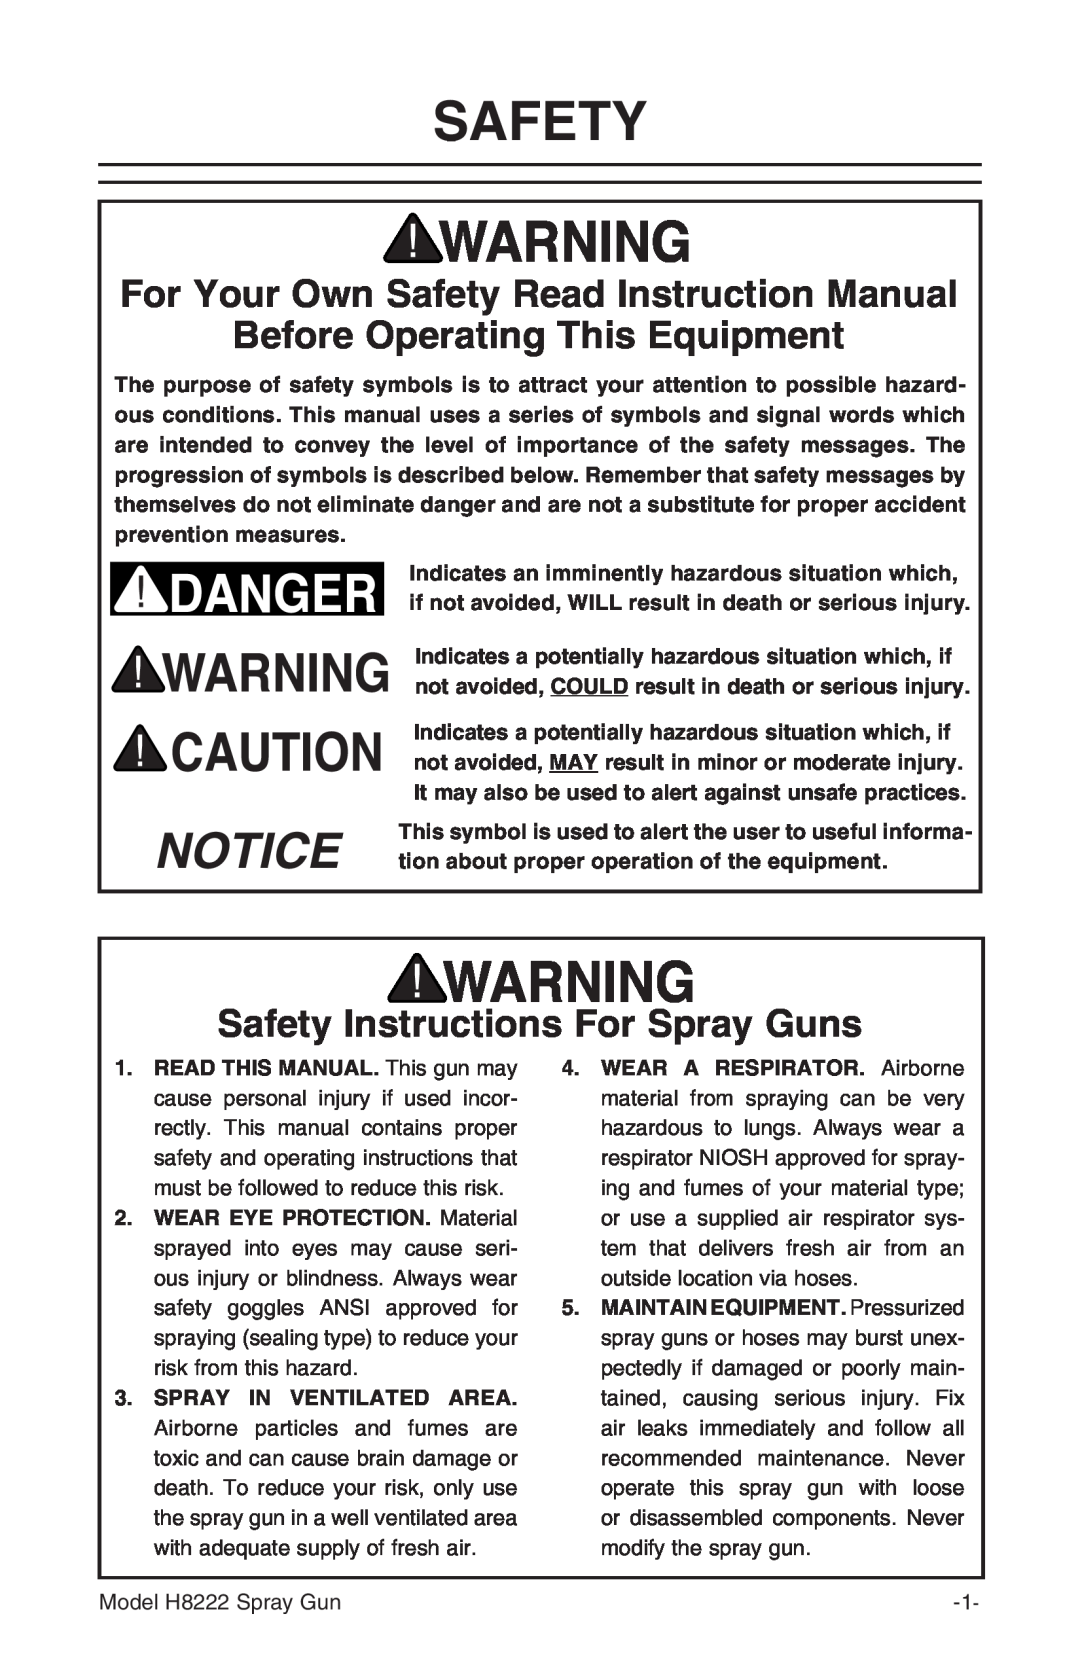 Grizzly Model H8222 instruction manual Before Operating This Equipment, Safety Instructions For Spray Guns 